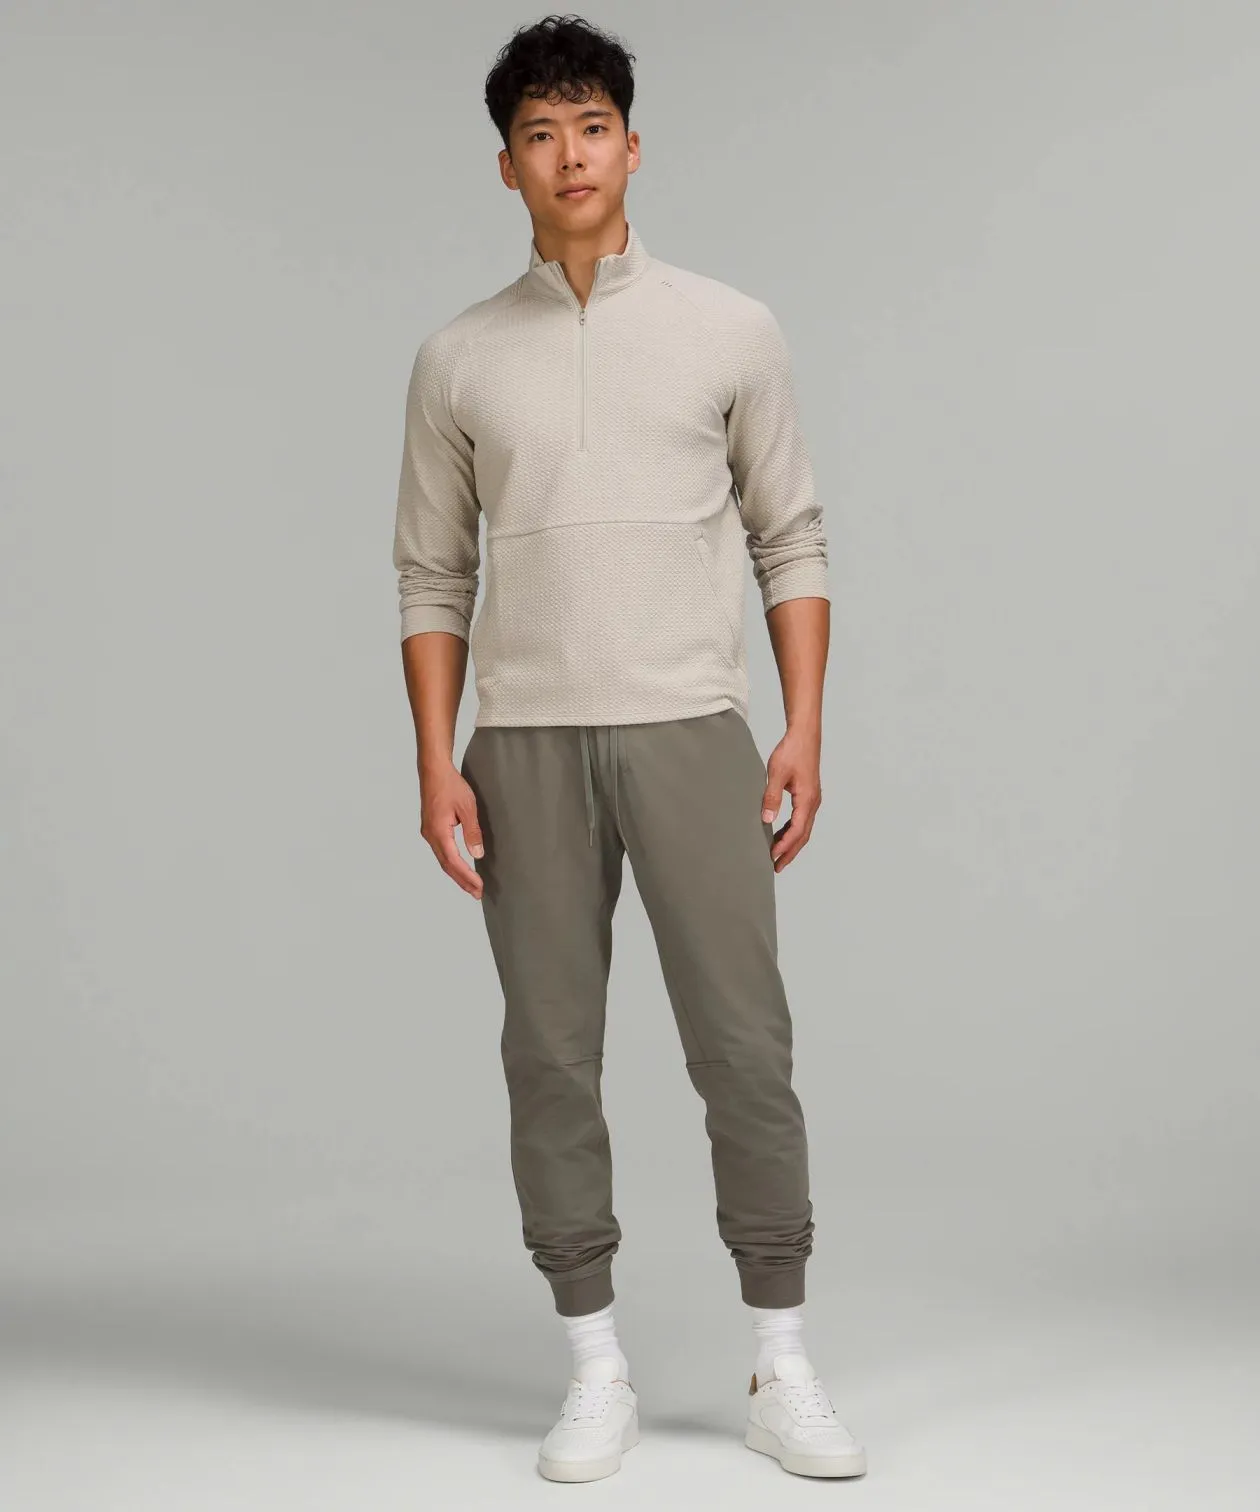 The Best Sweatpants for Tall Men: A Comprehensive Review